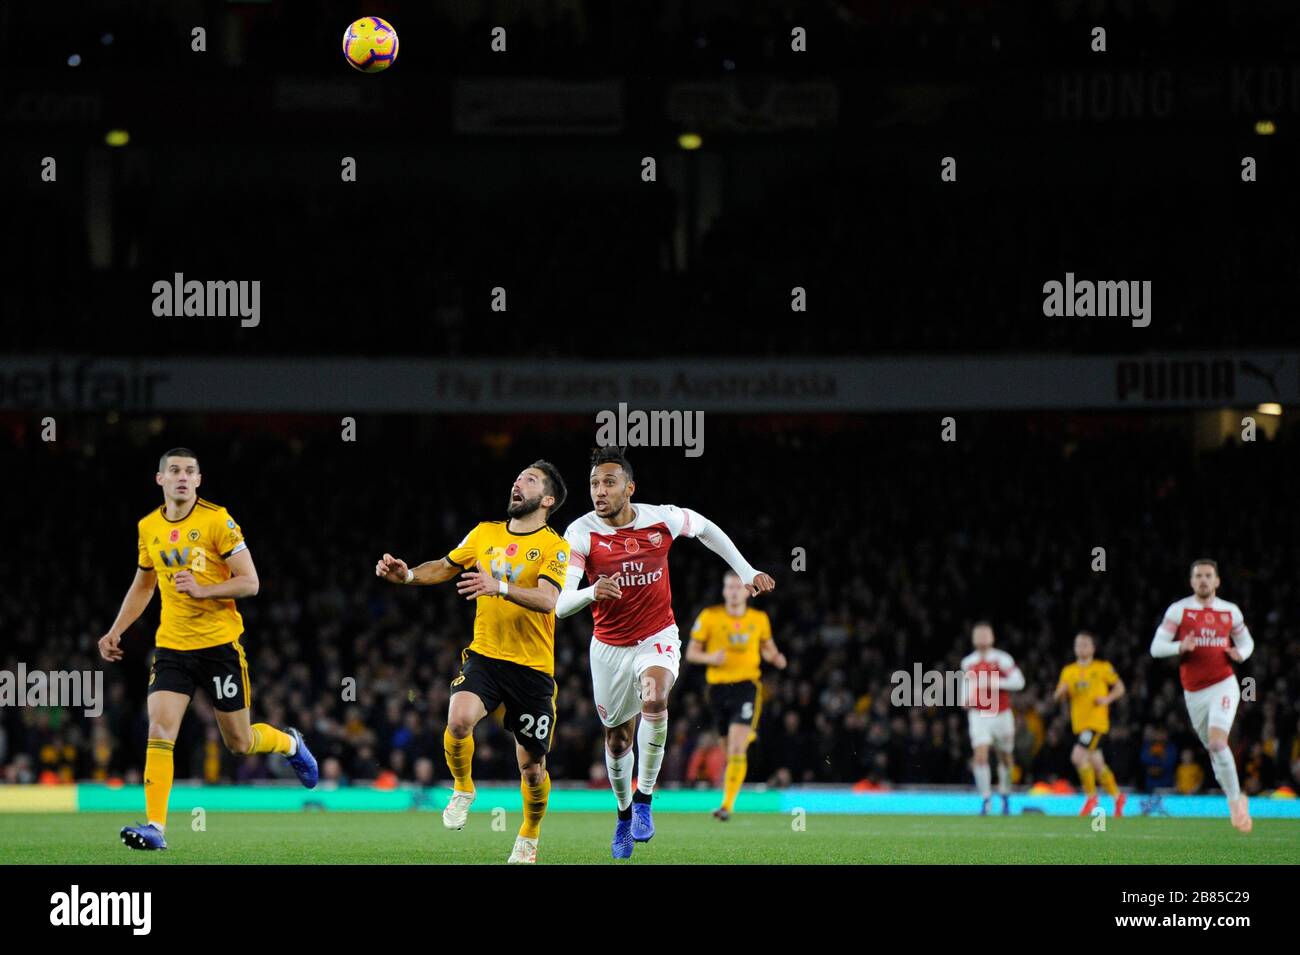 Pierre-Emerick Aubameyang of Arsenal and Joāo Moutinho of Wolverhampton Wanderers in action during the Premier League match between Arsenal and Wolverhampton Wanderers at Emirates Stadium in London, UK - 11th November 2018 Stock Photo